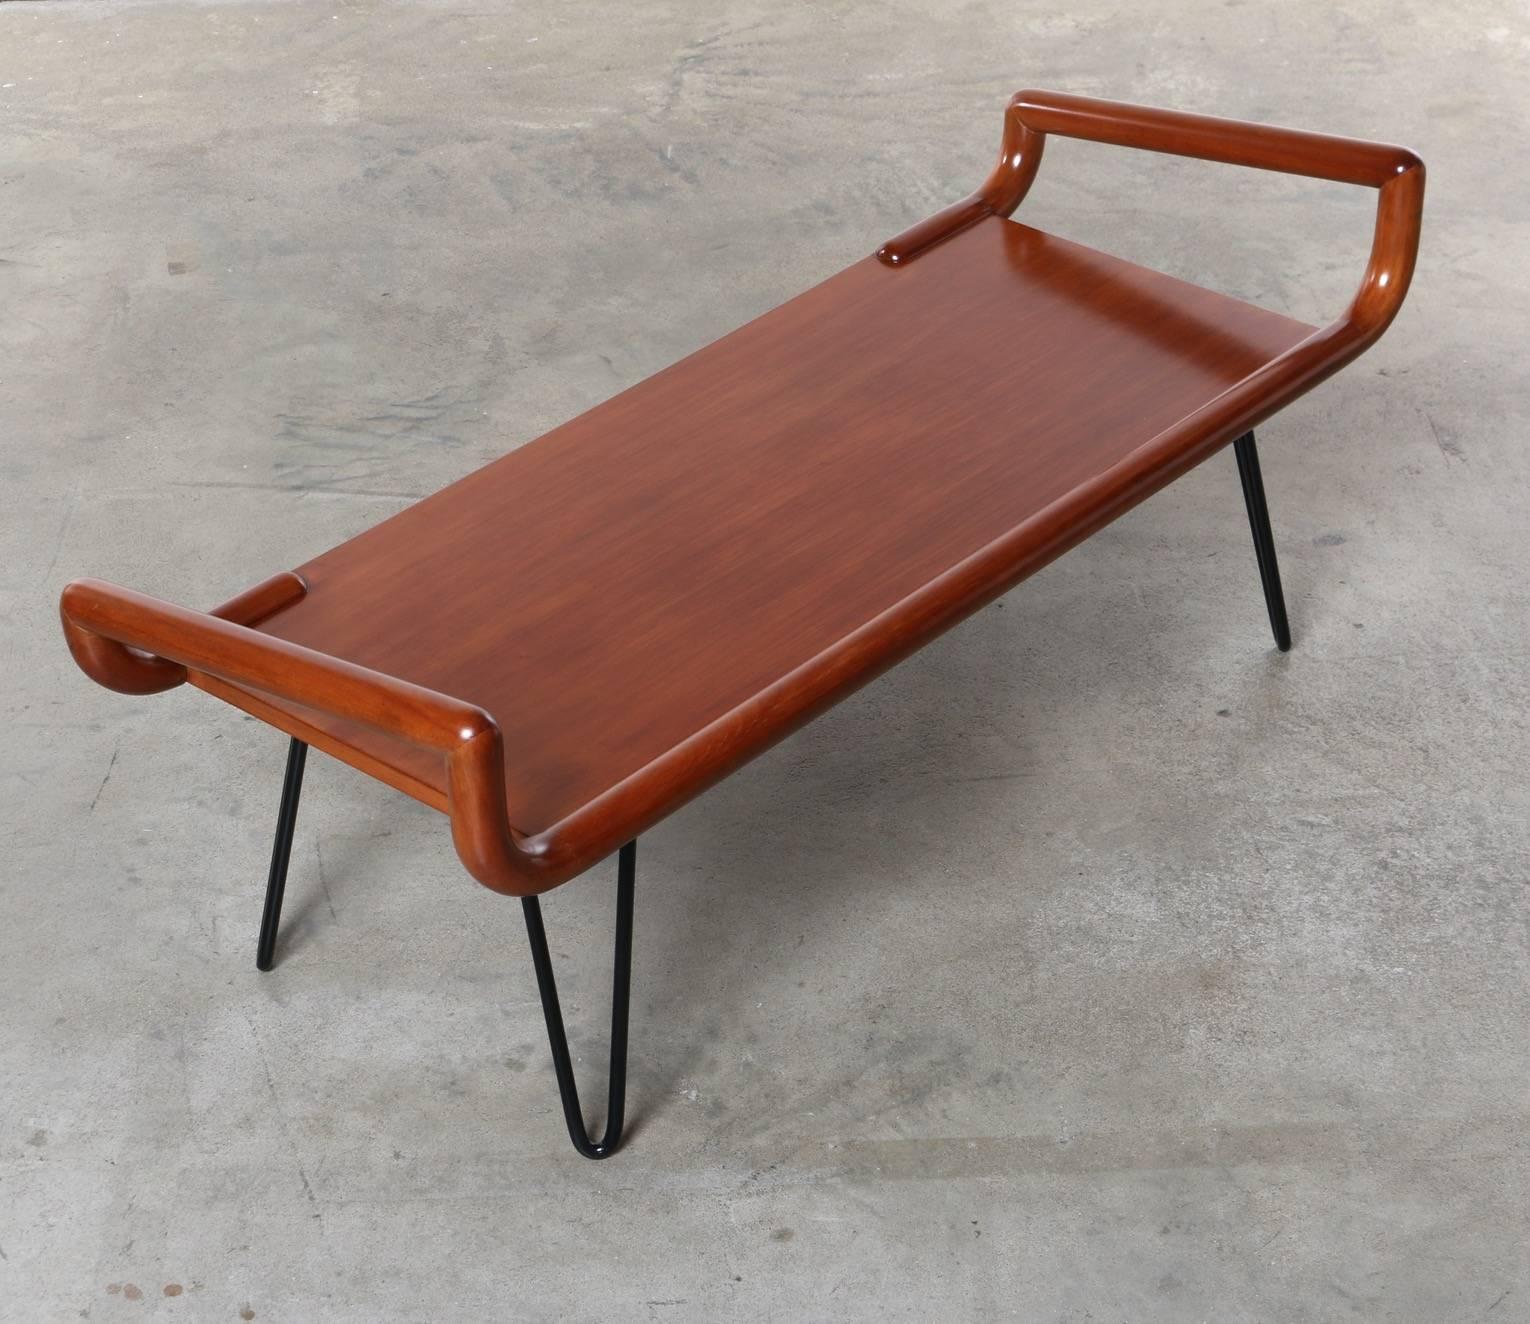 North American Midcentury Table or Bench with Hairpin Legs